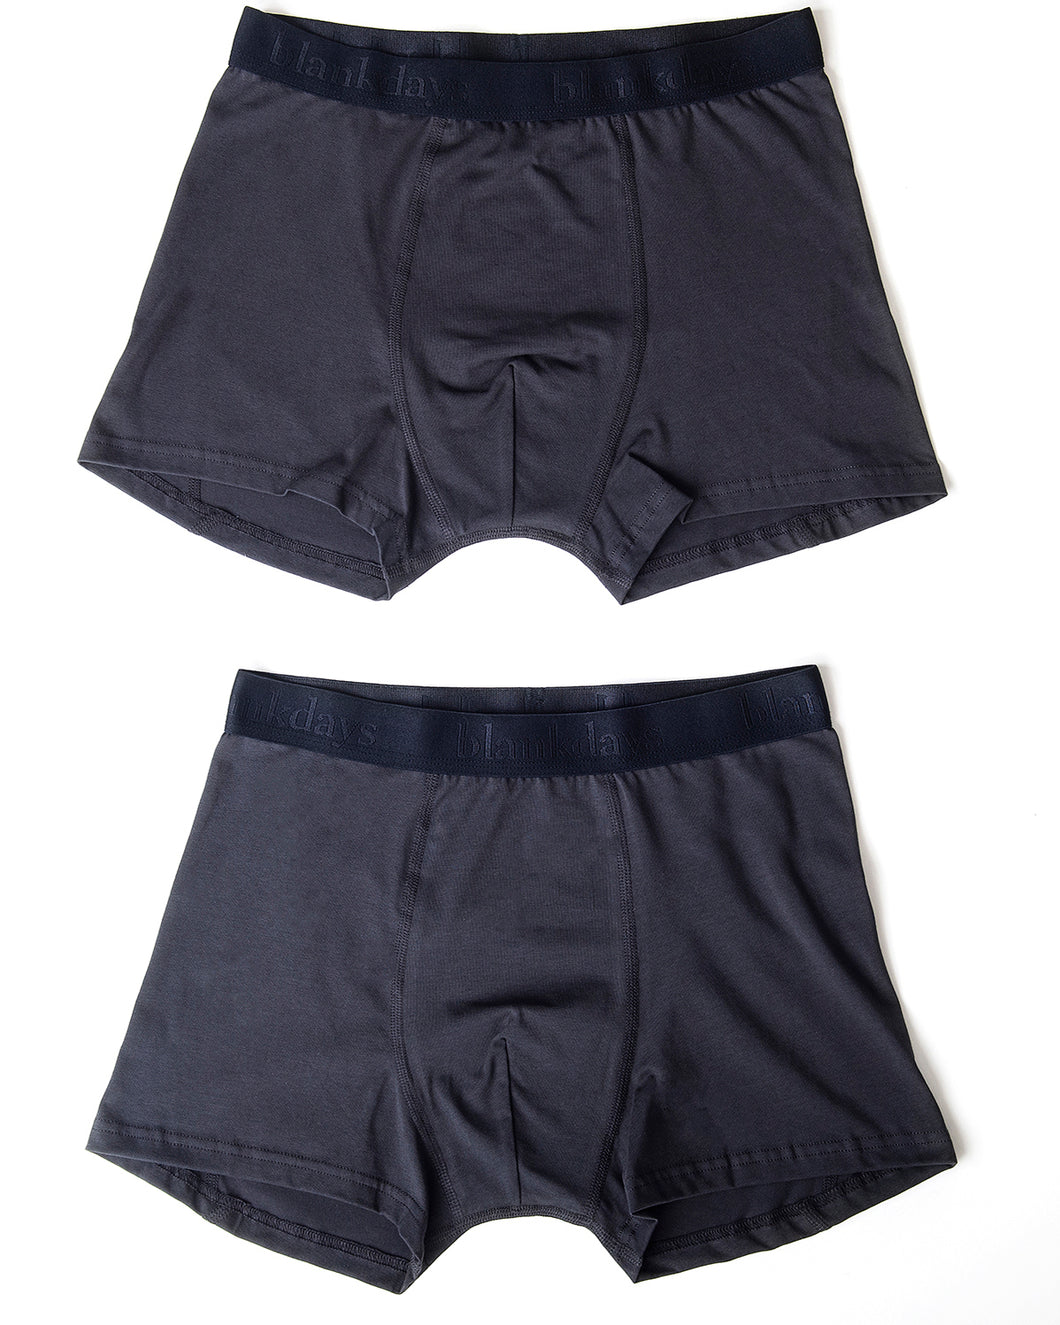 THE BOXER BRIEF SOLID NAVY- 2 PACK